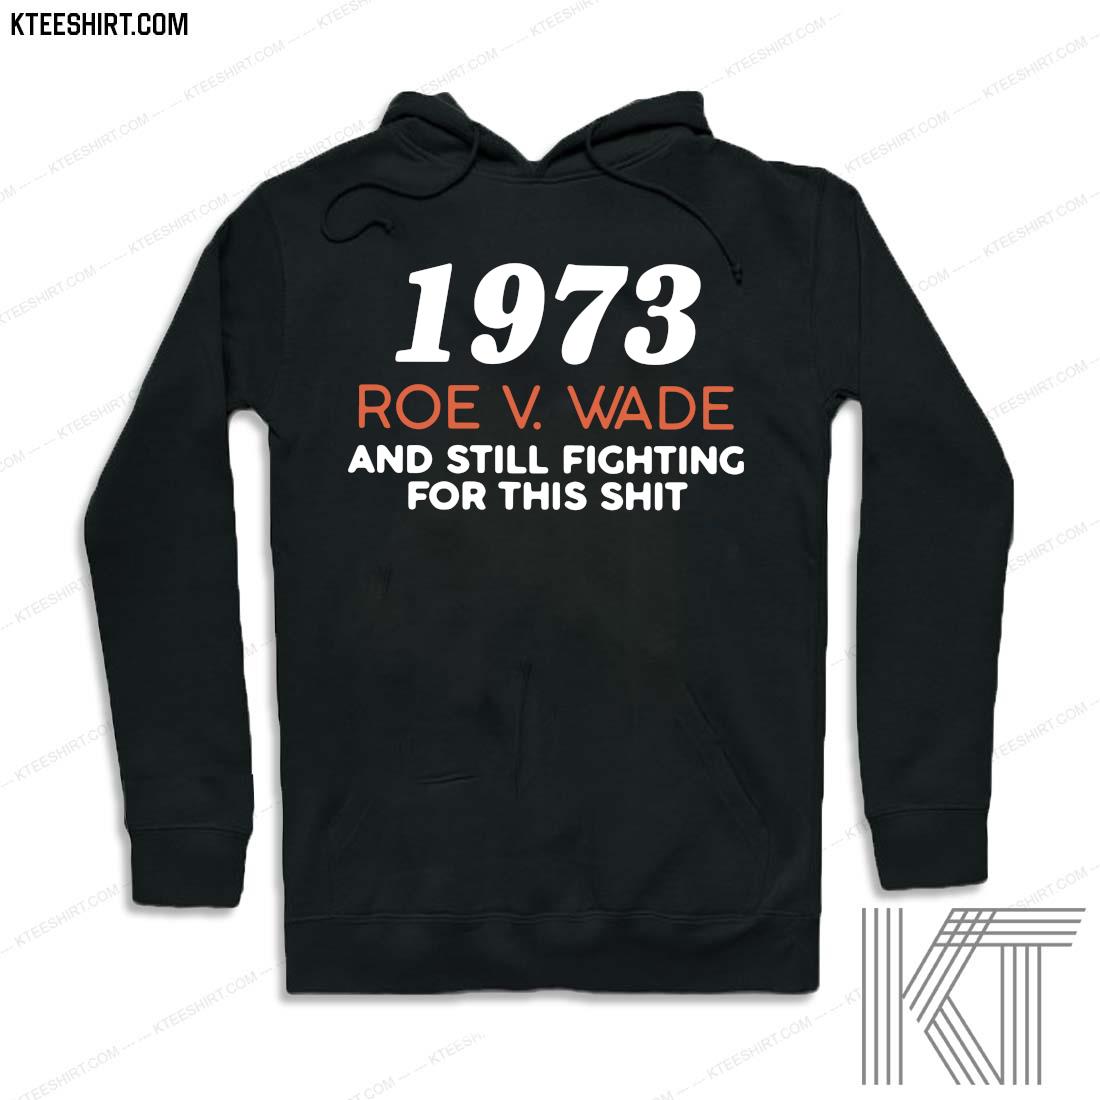 1973 Roe V Wade And Still Fighting For This Shit Shirt hoodie